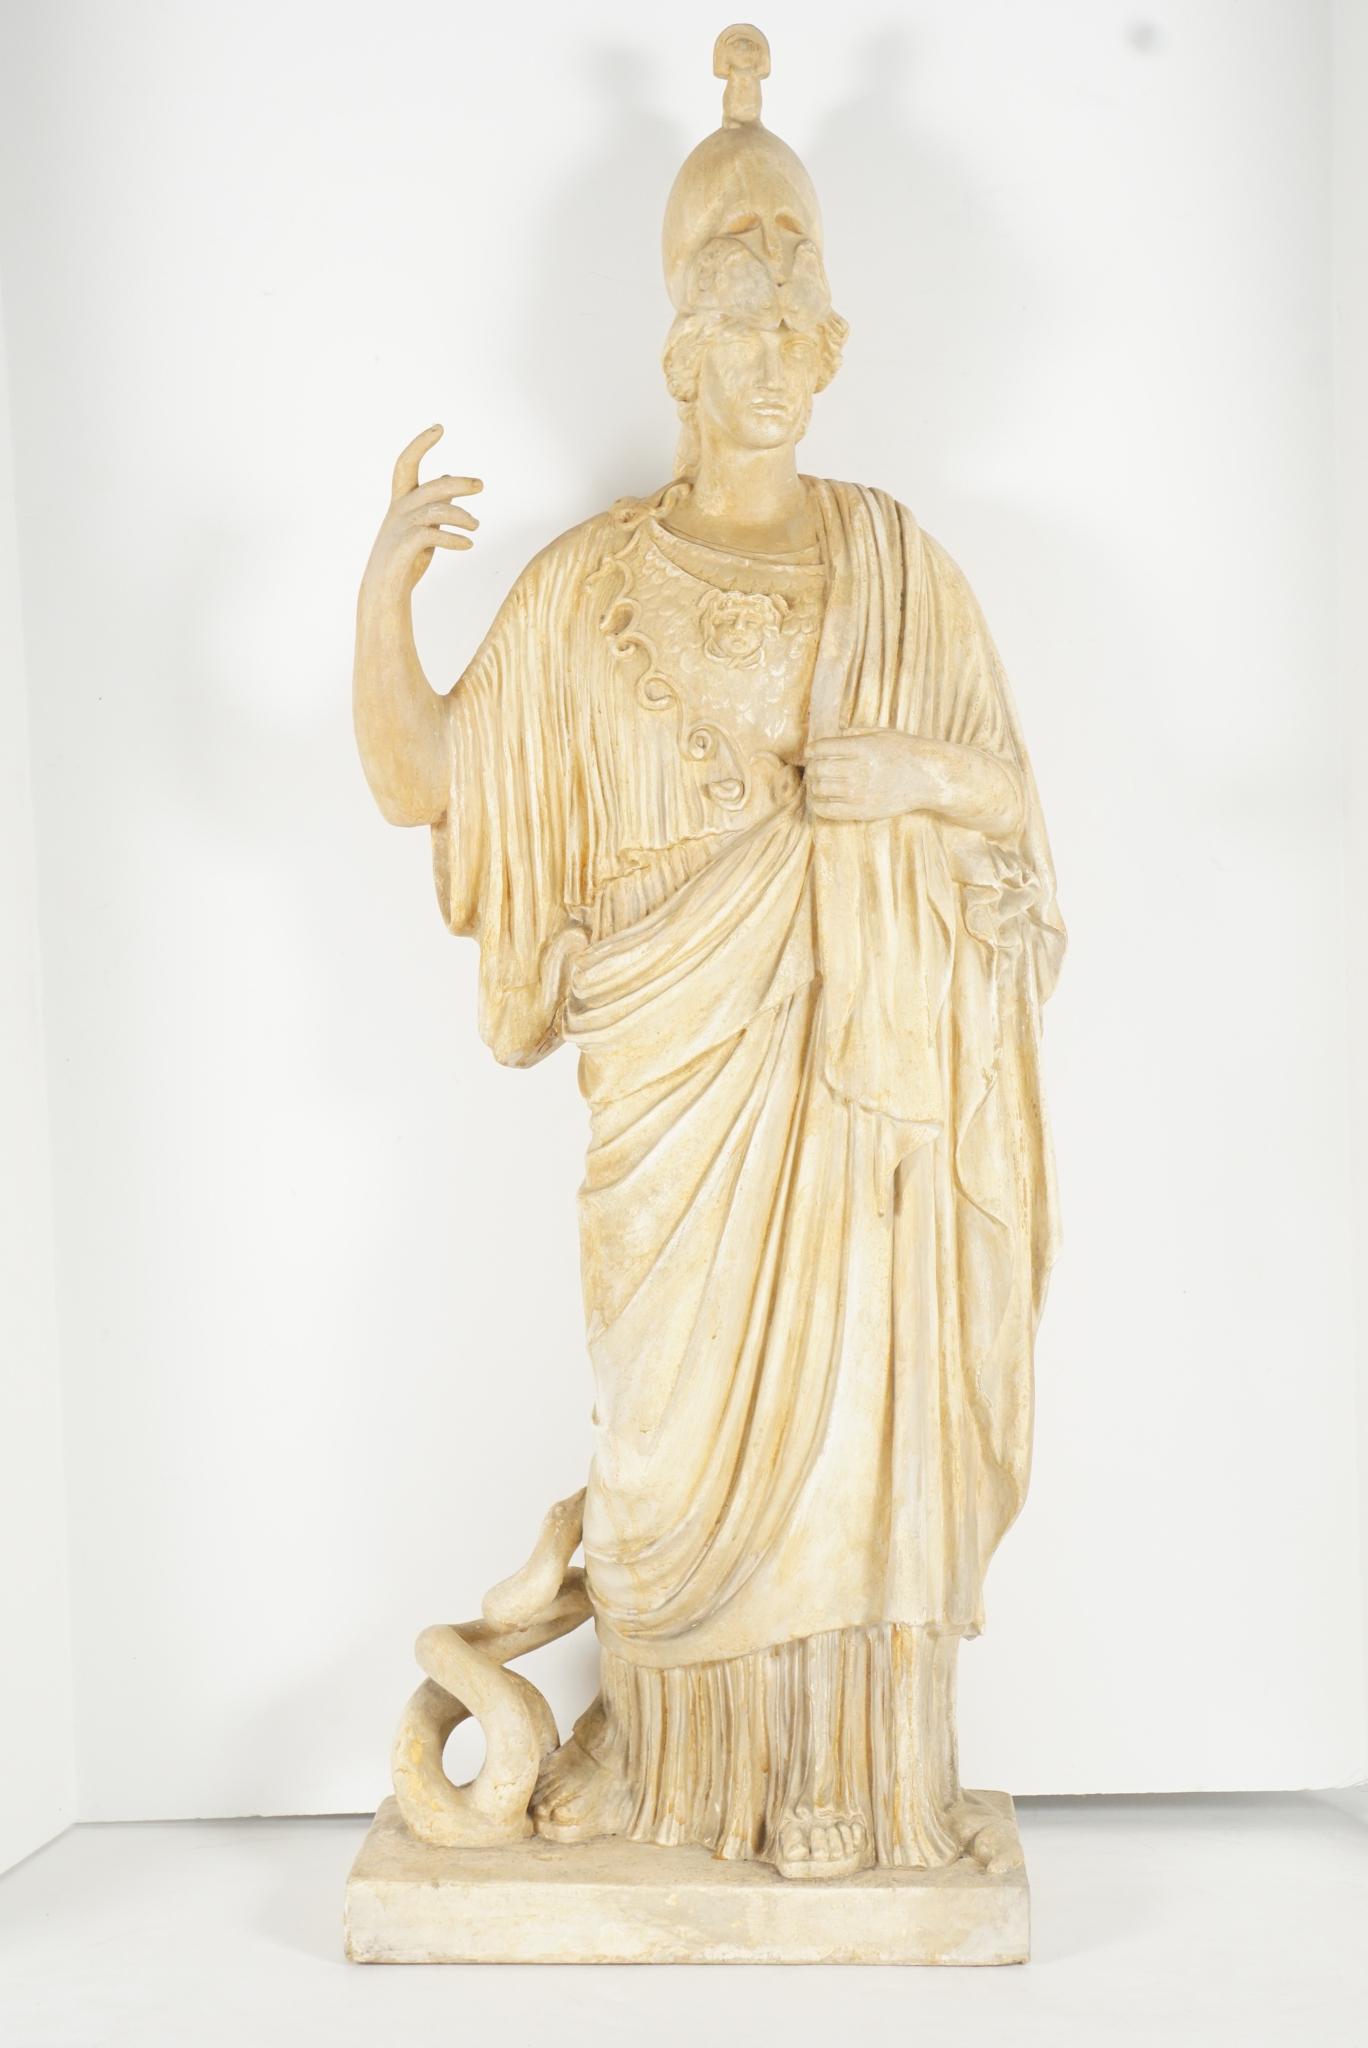 This figure of a somewhat large scale is the Athena Giustiniani. The original greek statue by Pheidias of Pallas Athena is lost but this is a Roman copy of the 5th-early 4th century BCE. This figure most likely a cult image shows at her feet a great